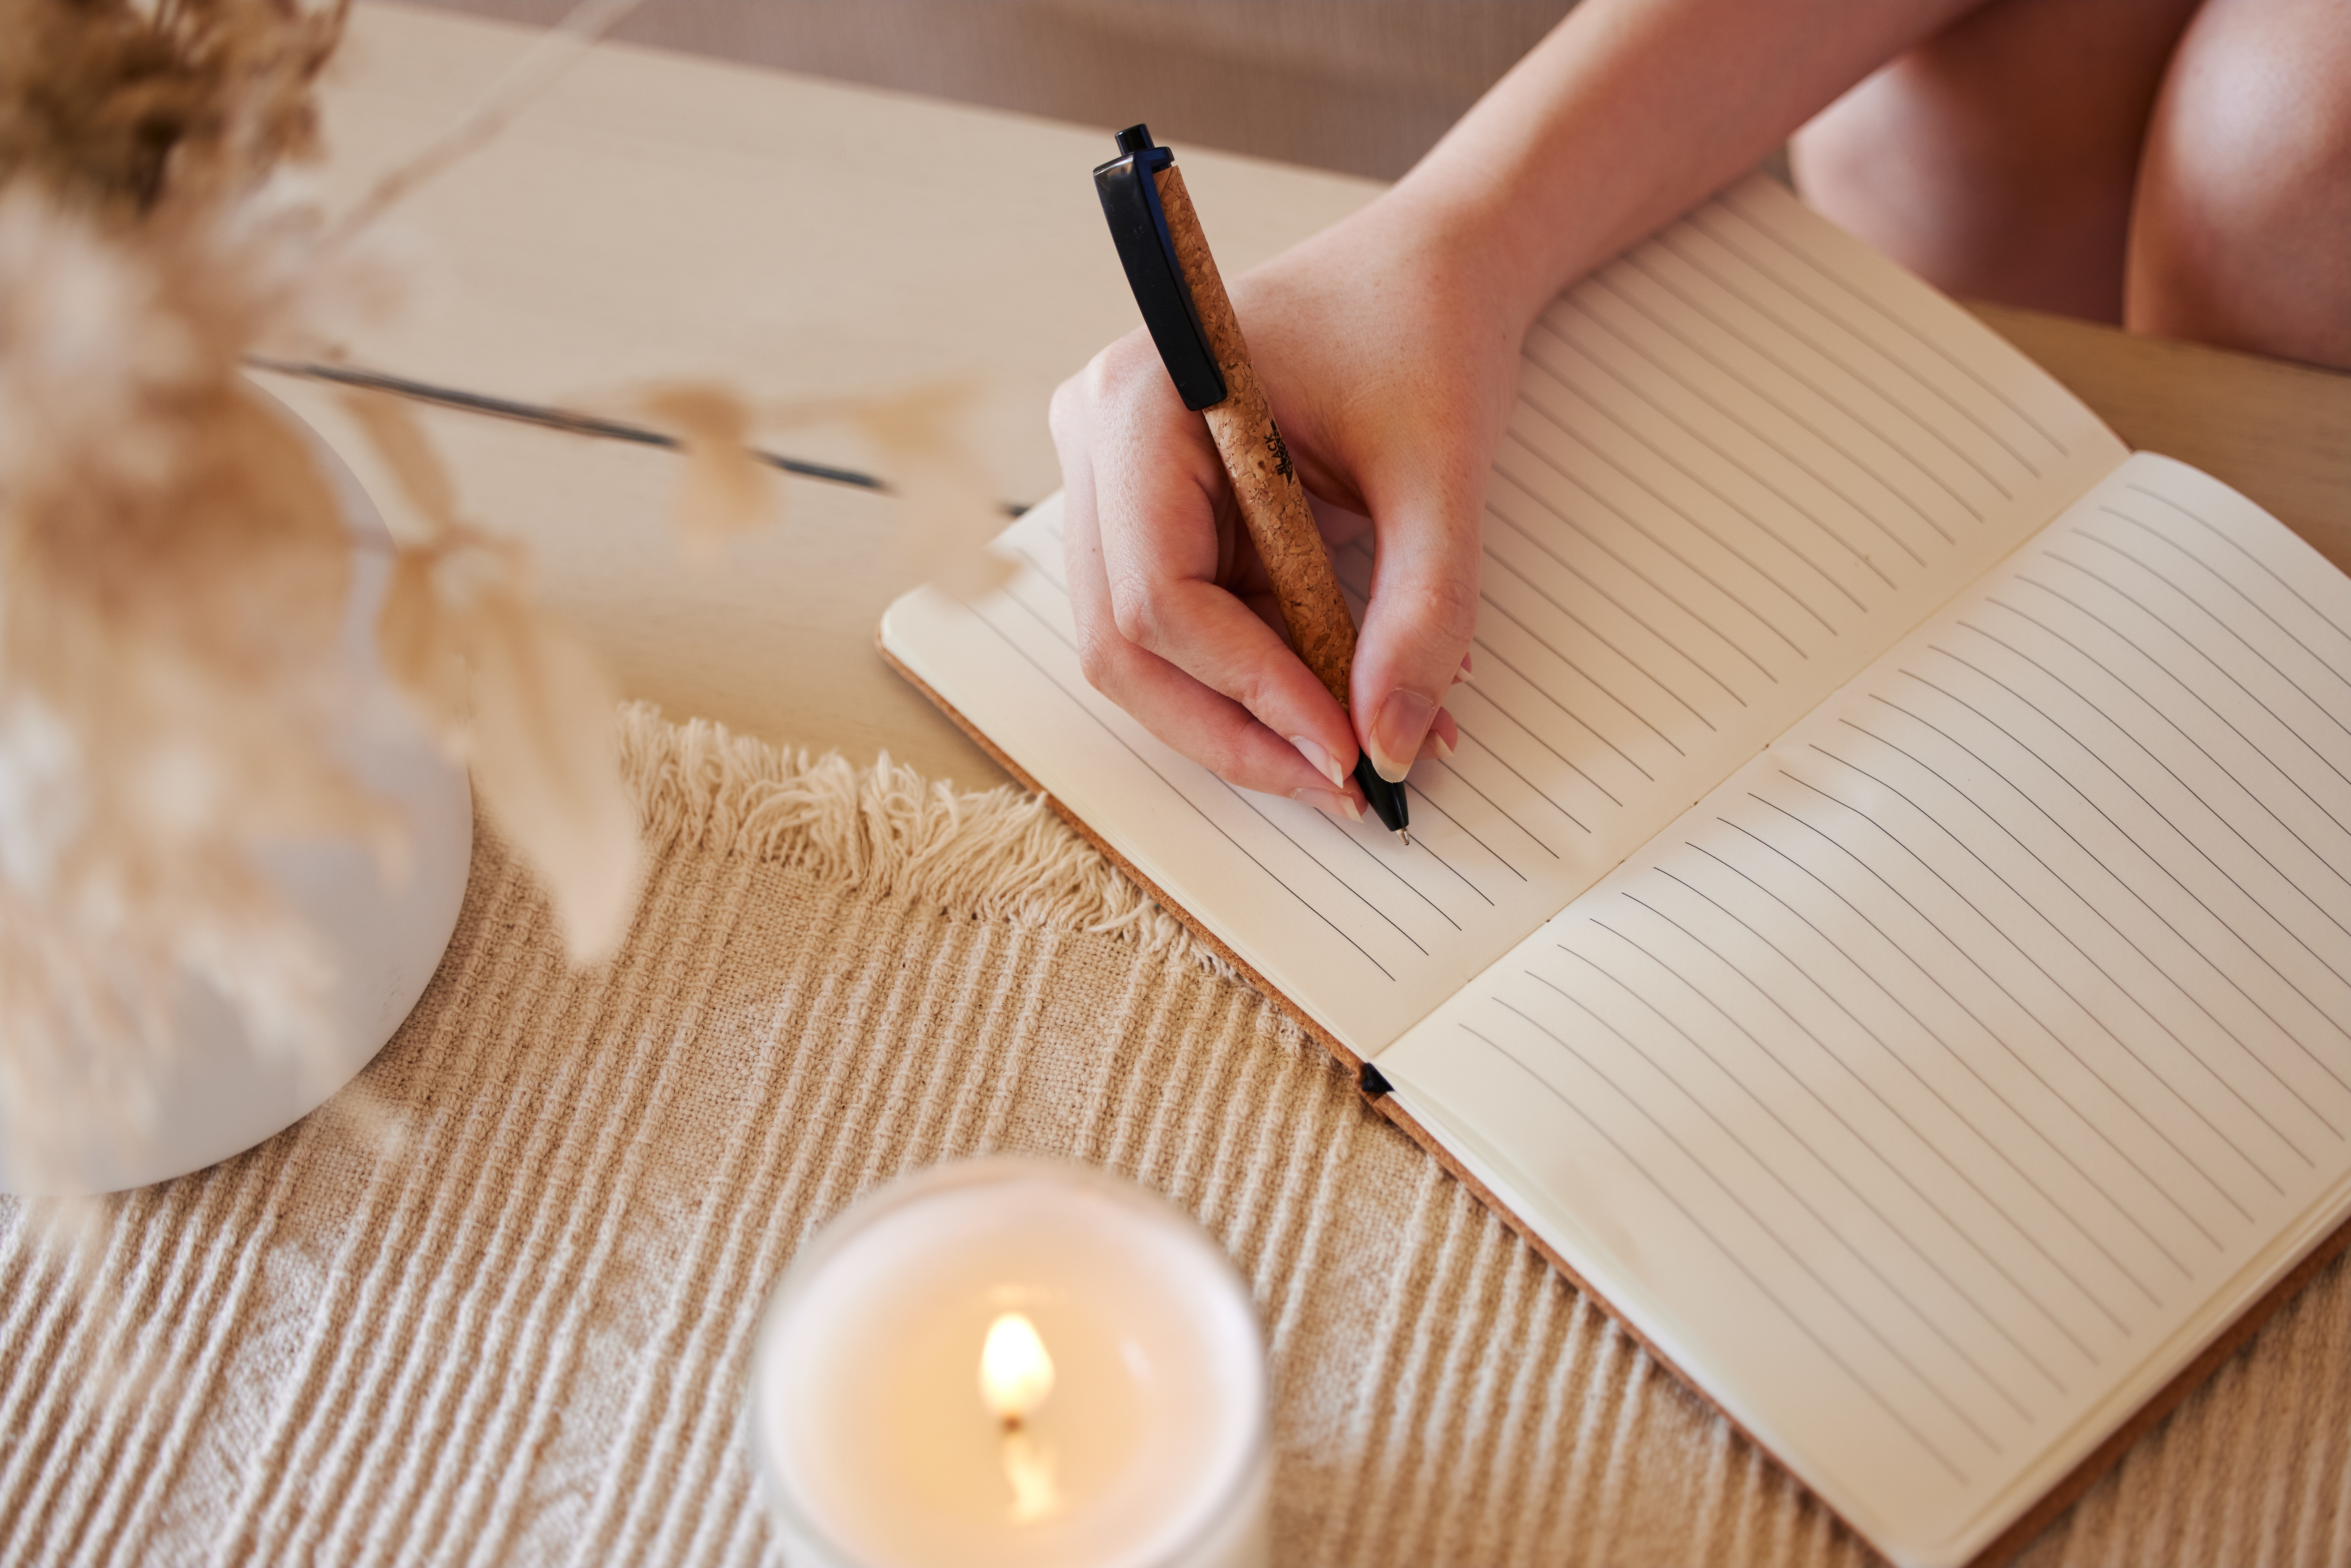 A lit candle next to someone writing in a journal